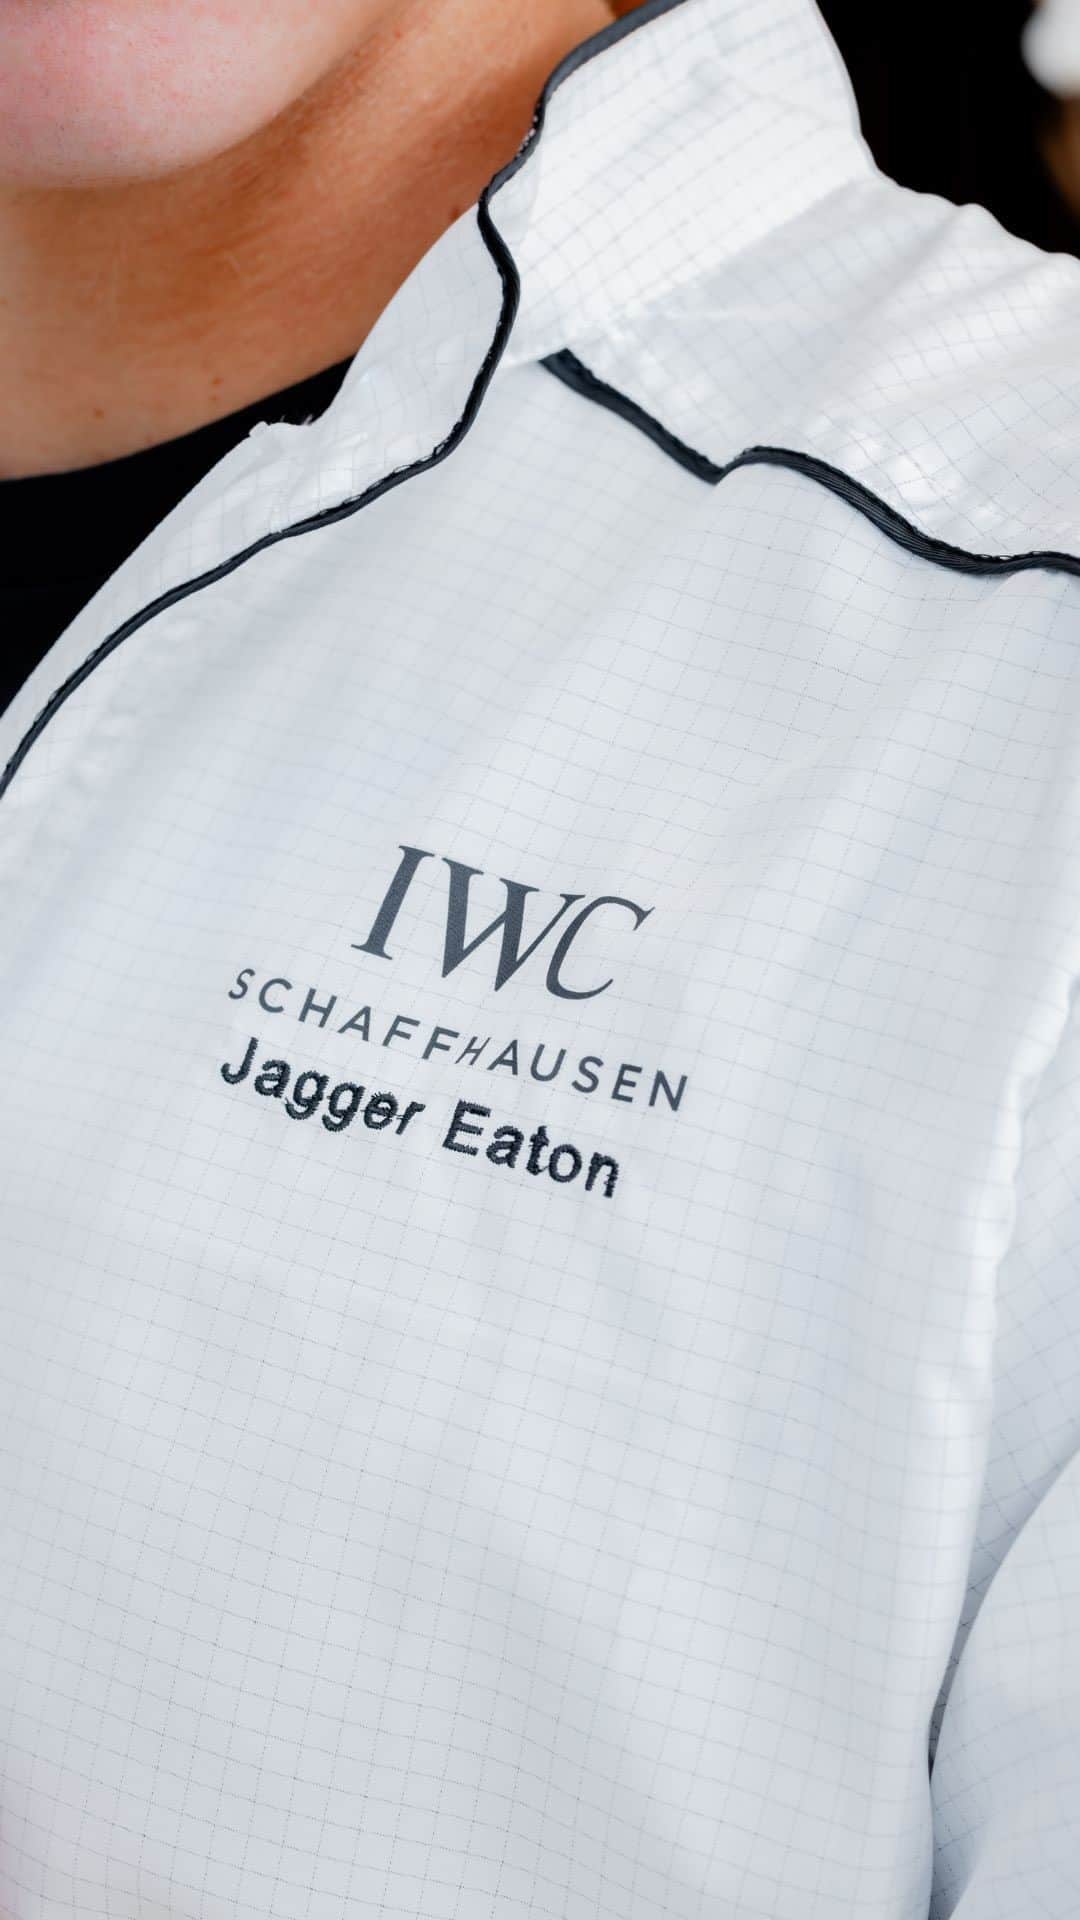 IWCのインスタグラム：「Our newest watchmaker… or is he? Skateboarding superstar @jaggereaton engineers something a little different at the watchmaker’s table.   #IWCwatches I #IWCfamily.」